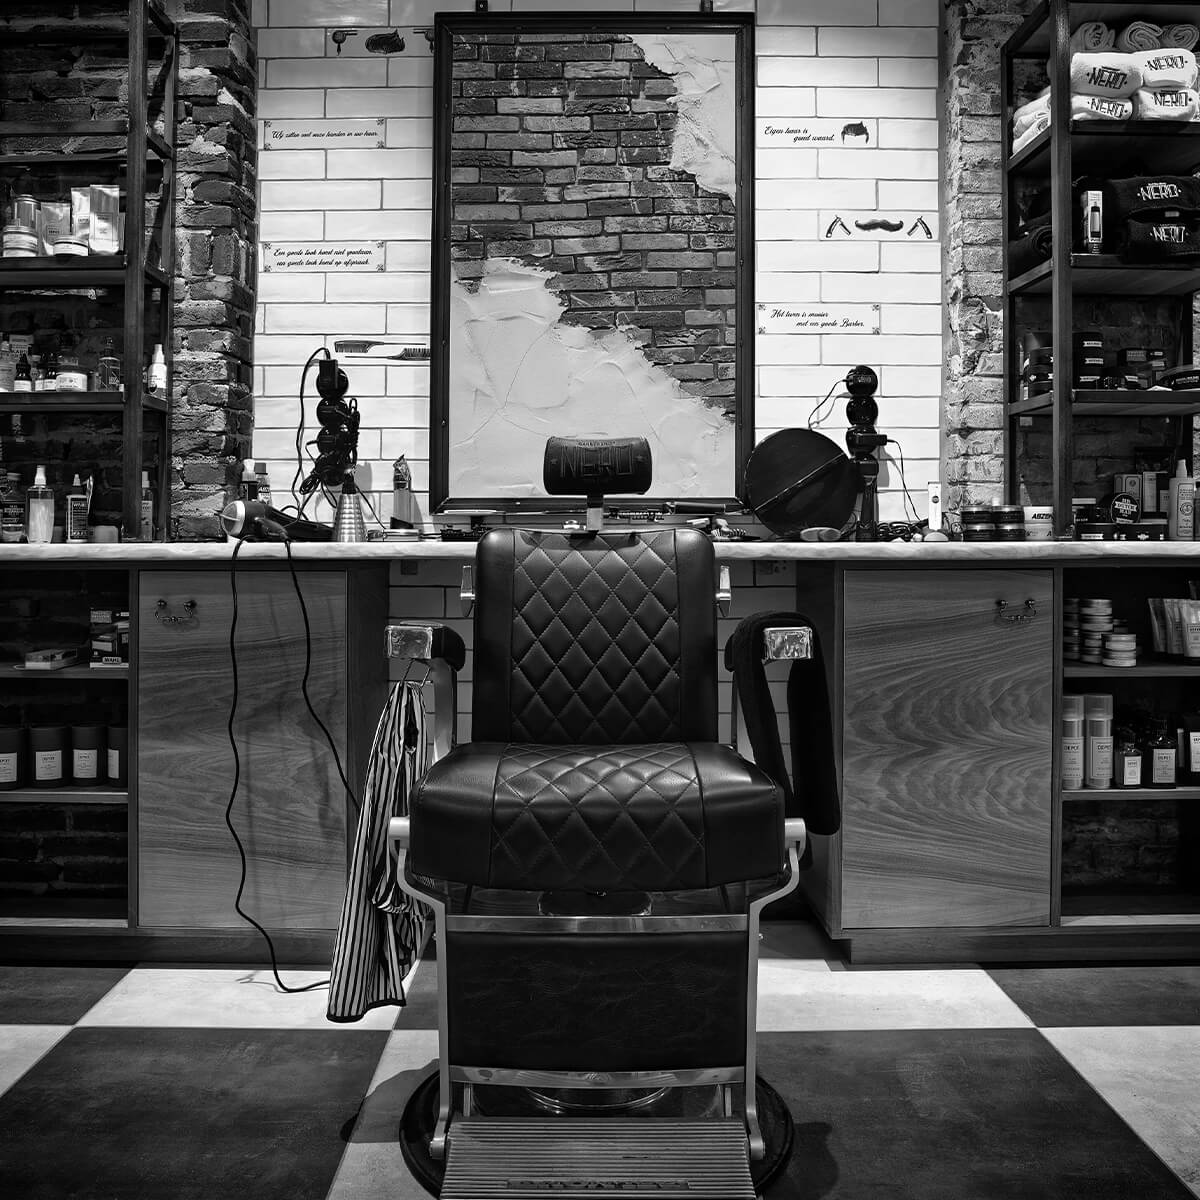 The hairdresser's chair